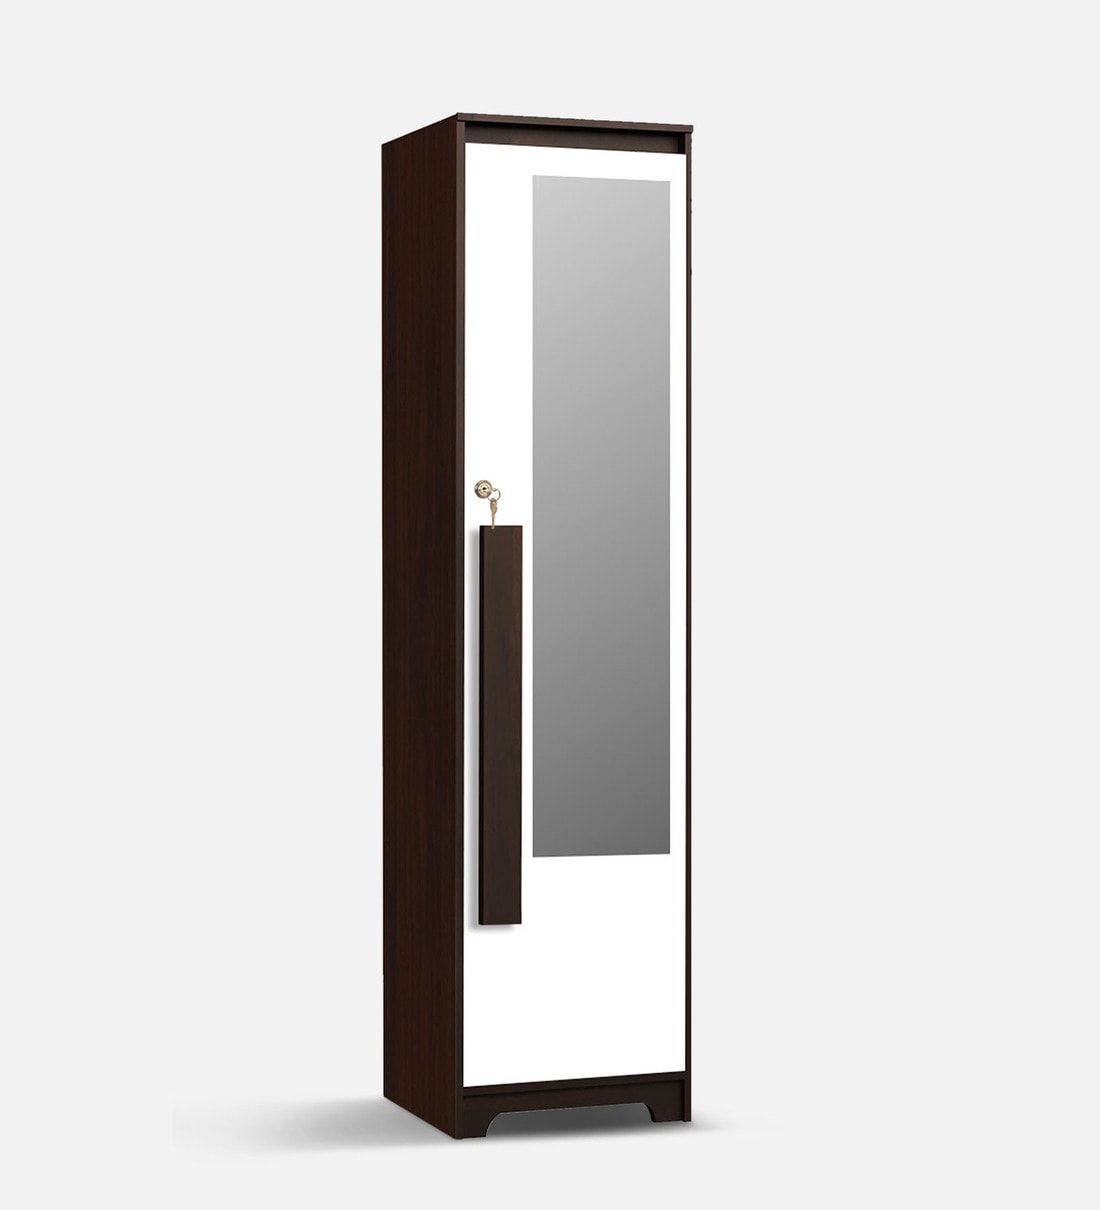 Buy Regal Grand 1 Door Wardrobe In Walnut & White Finish With Mirror At 48%  Offtrevi Furniture | Pepperfry Regarding 1 Door Mirrored Wardrobes (View 15 of 15)